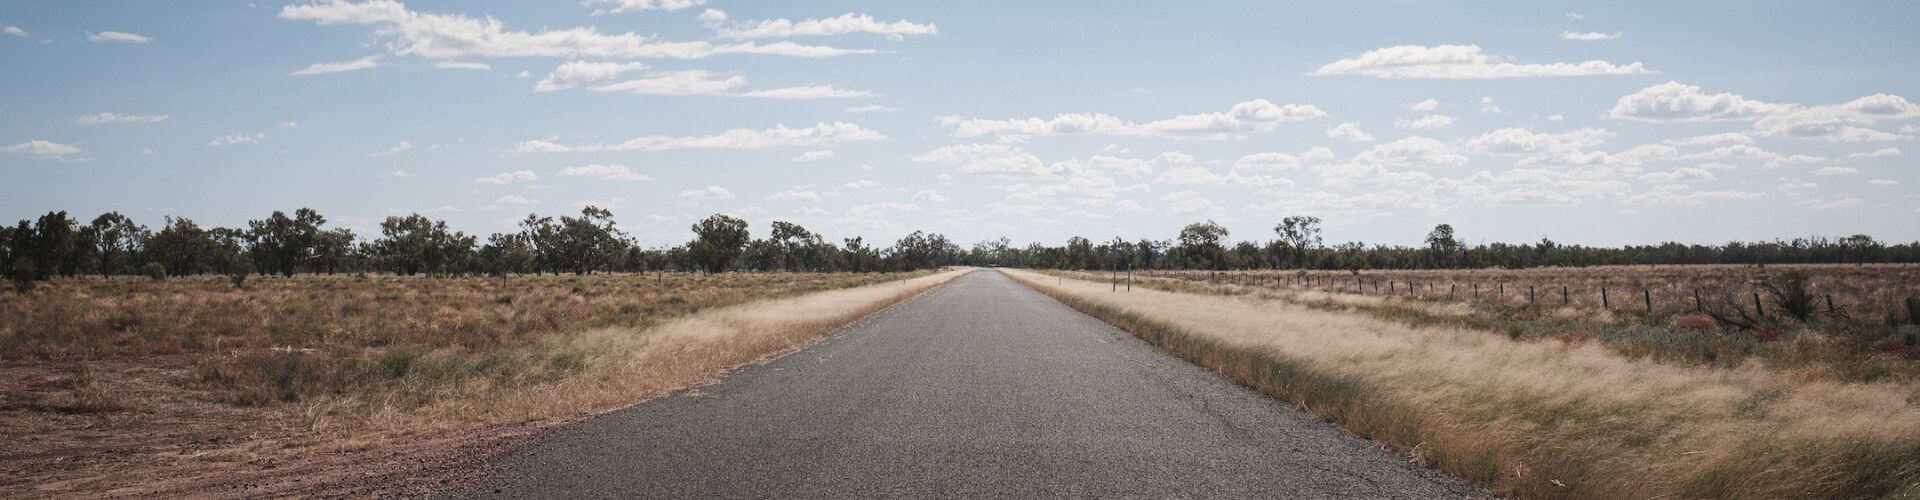 A bitumen road cuts through the middle of dry, rural land. The blue sky is bright and clear.